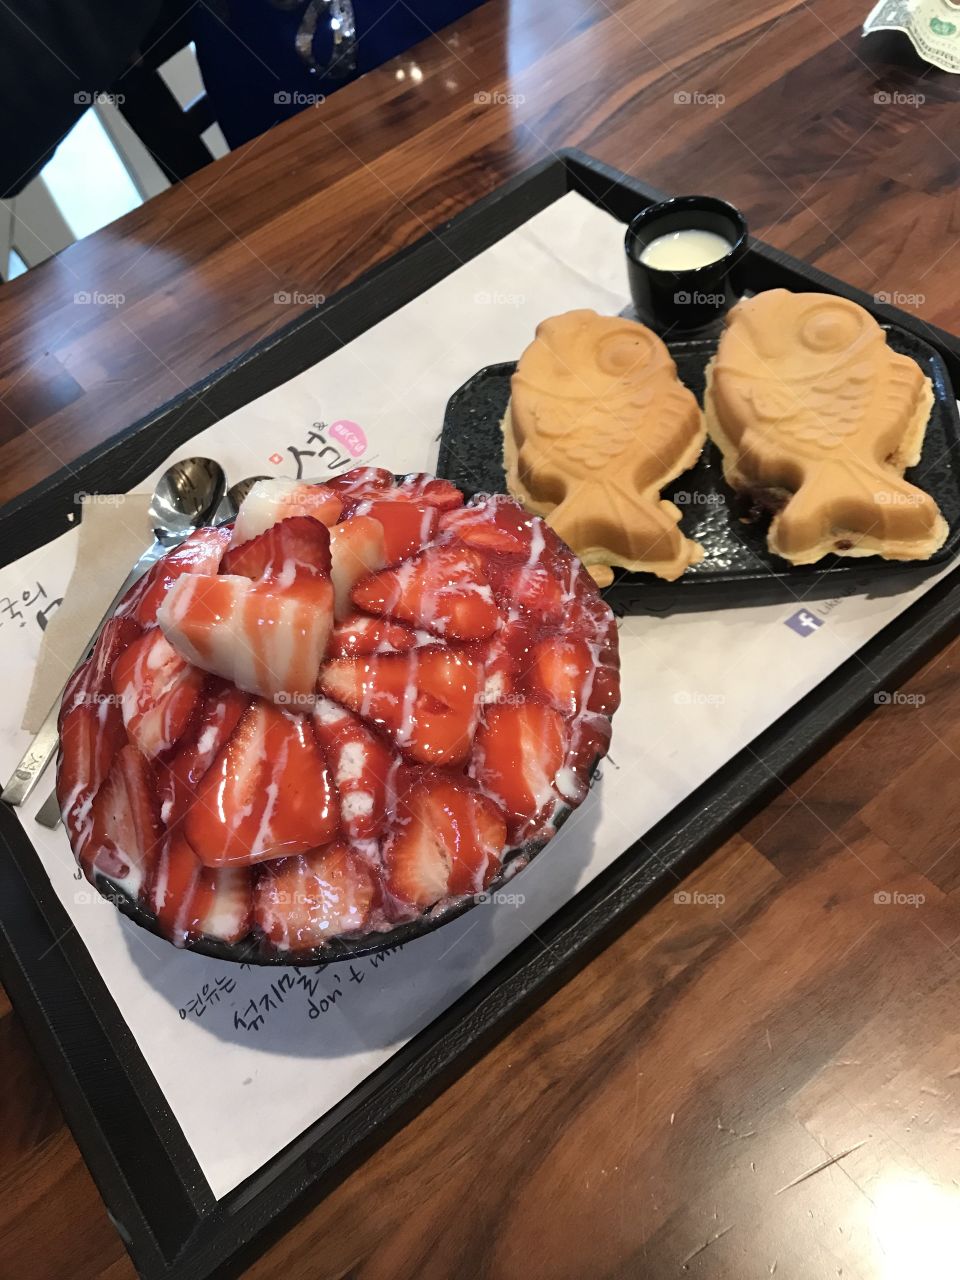 Delicious Korean dessert called bingsu, made with shaved ice and usually topped with sweet toppings like these strawberries and condensed milk.